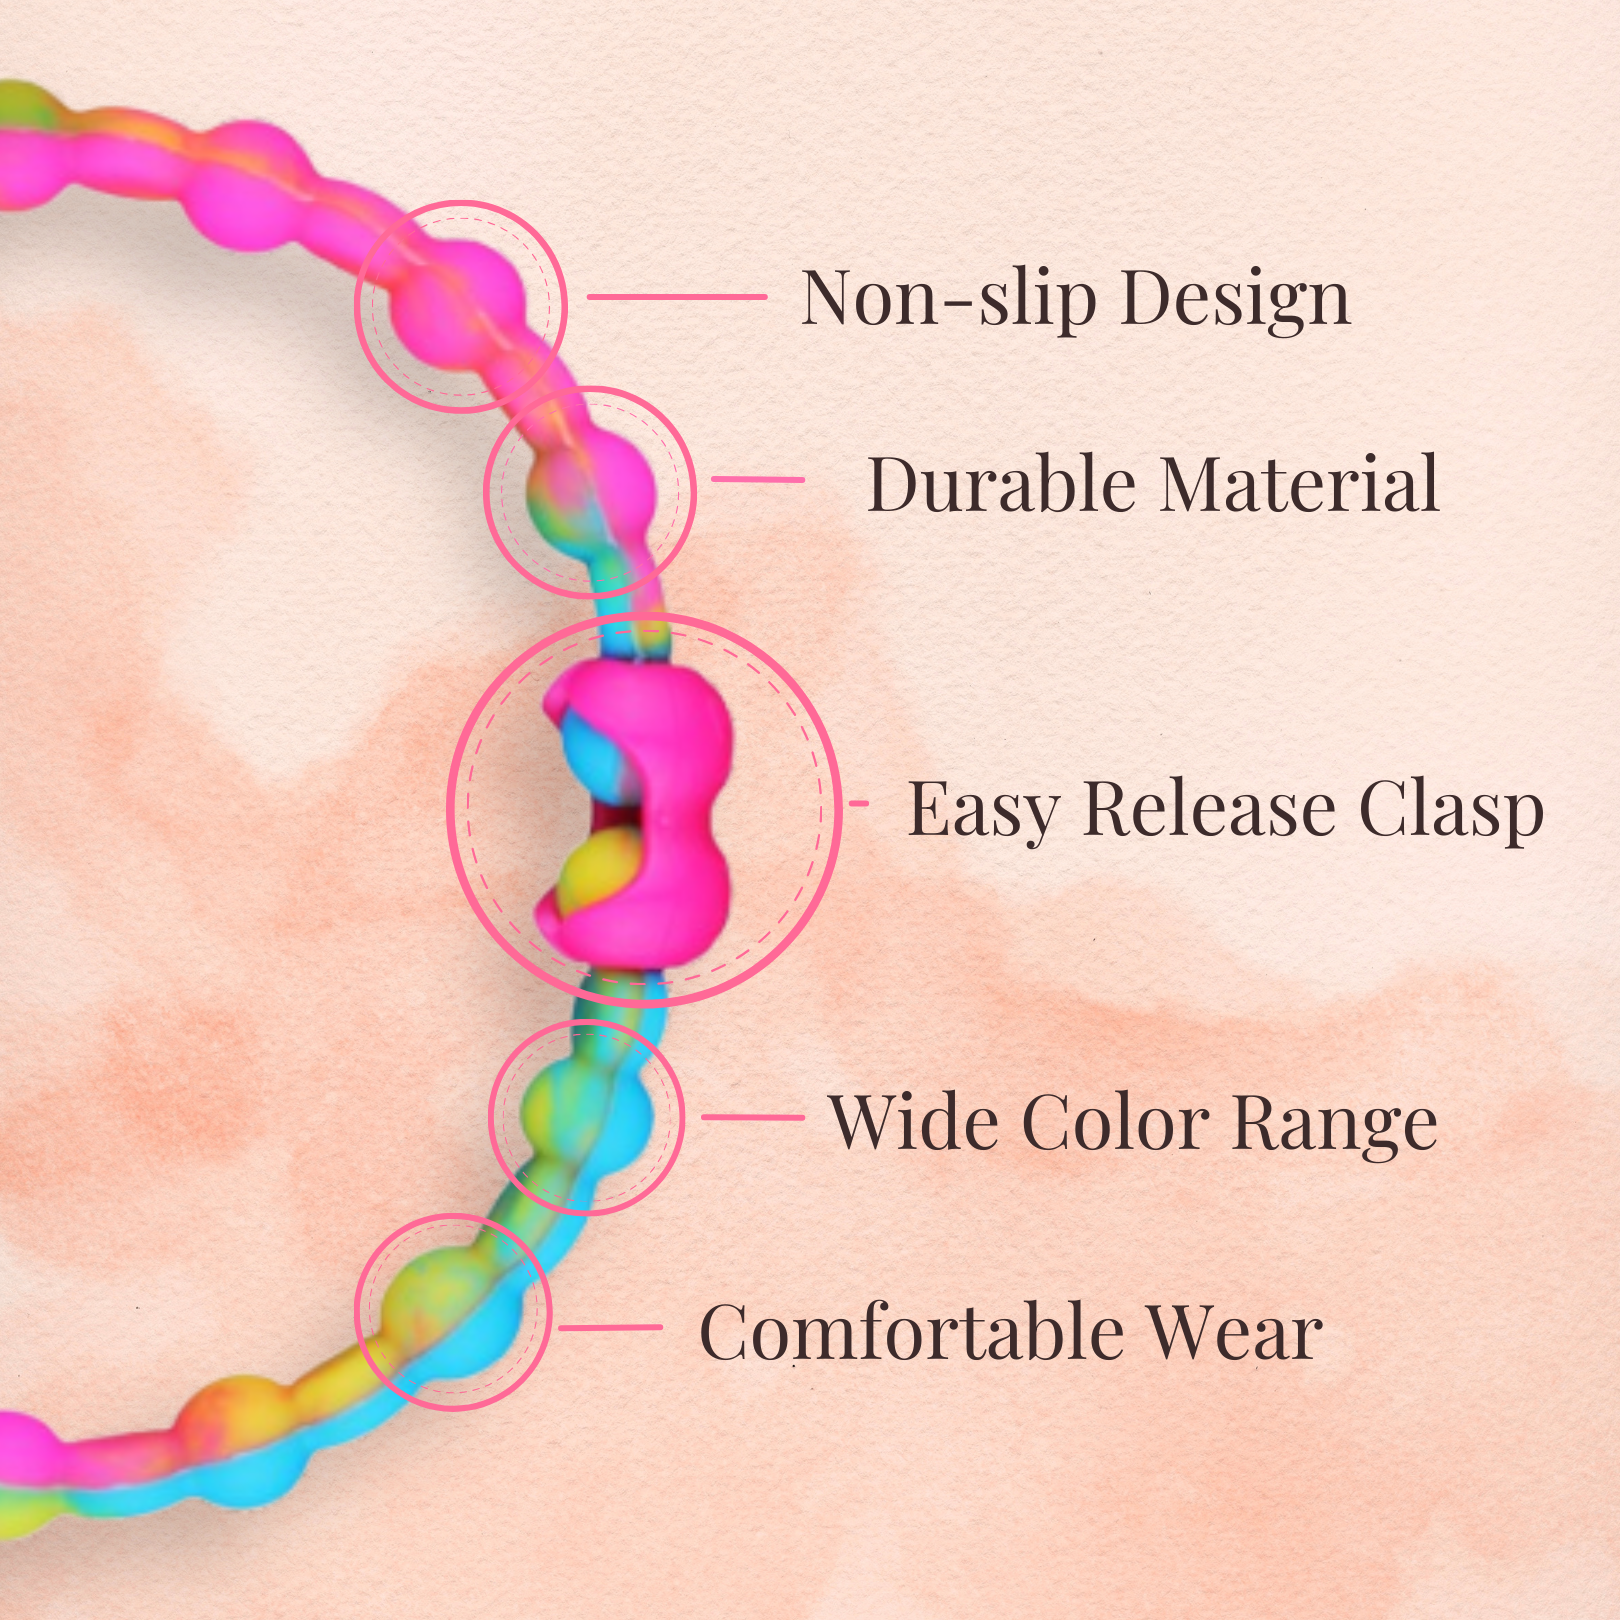 Autumn Harvest Pack PRO Hair Ties: Easy Release Adjustable for Every Hair Type PACK OF 6